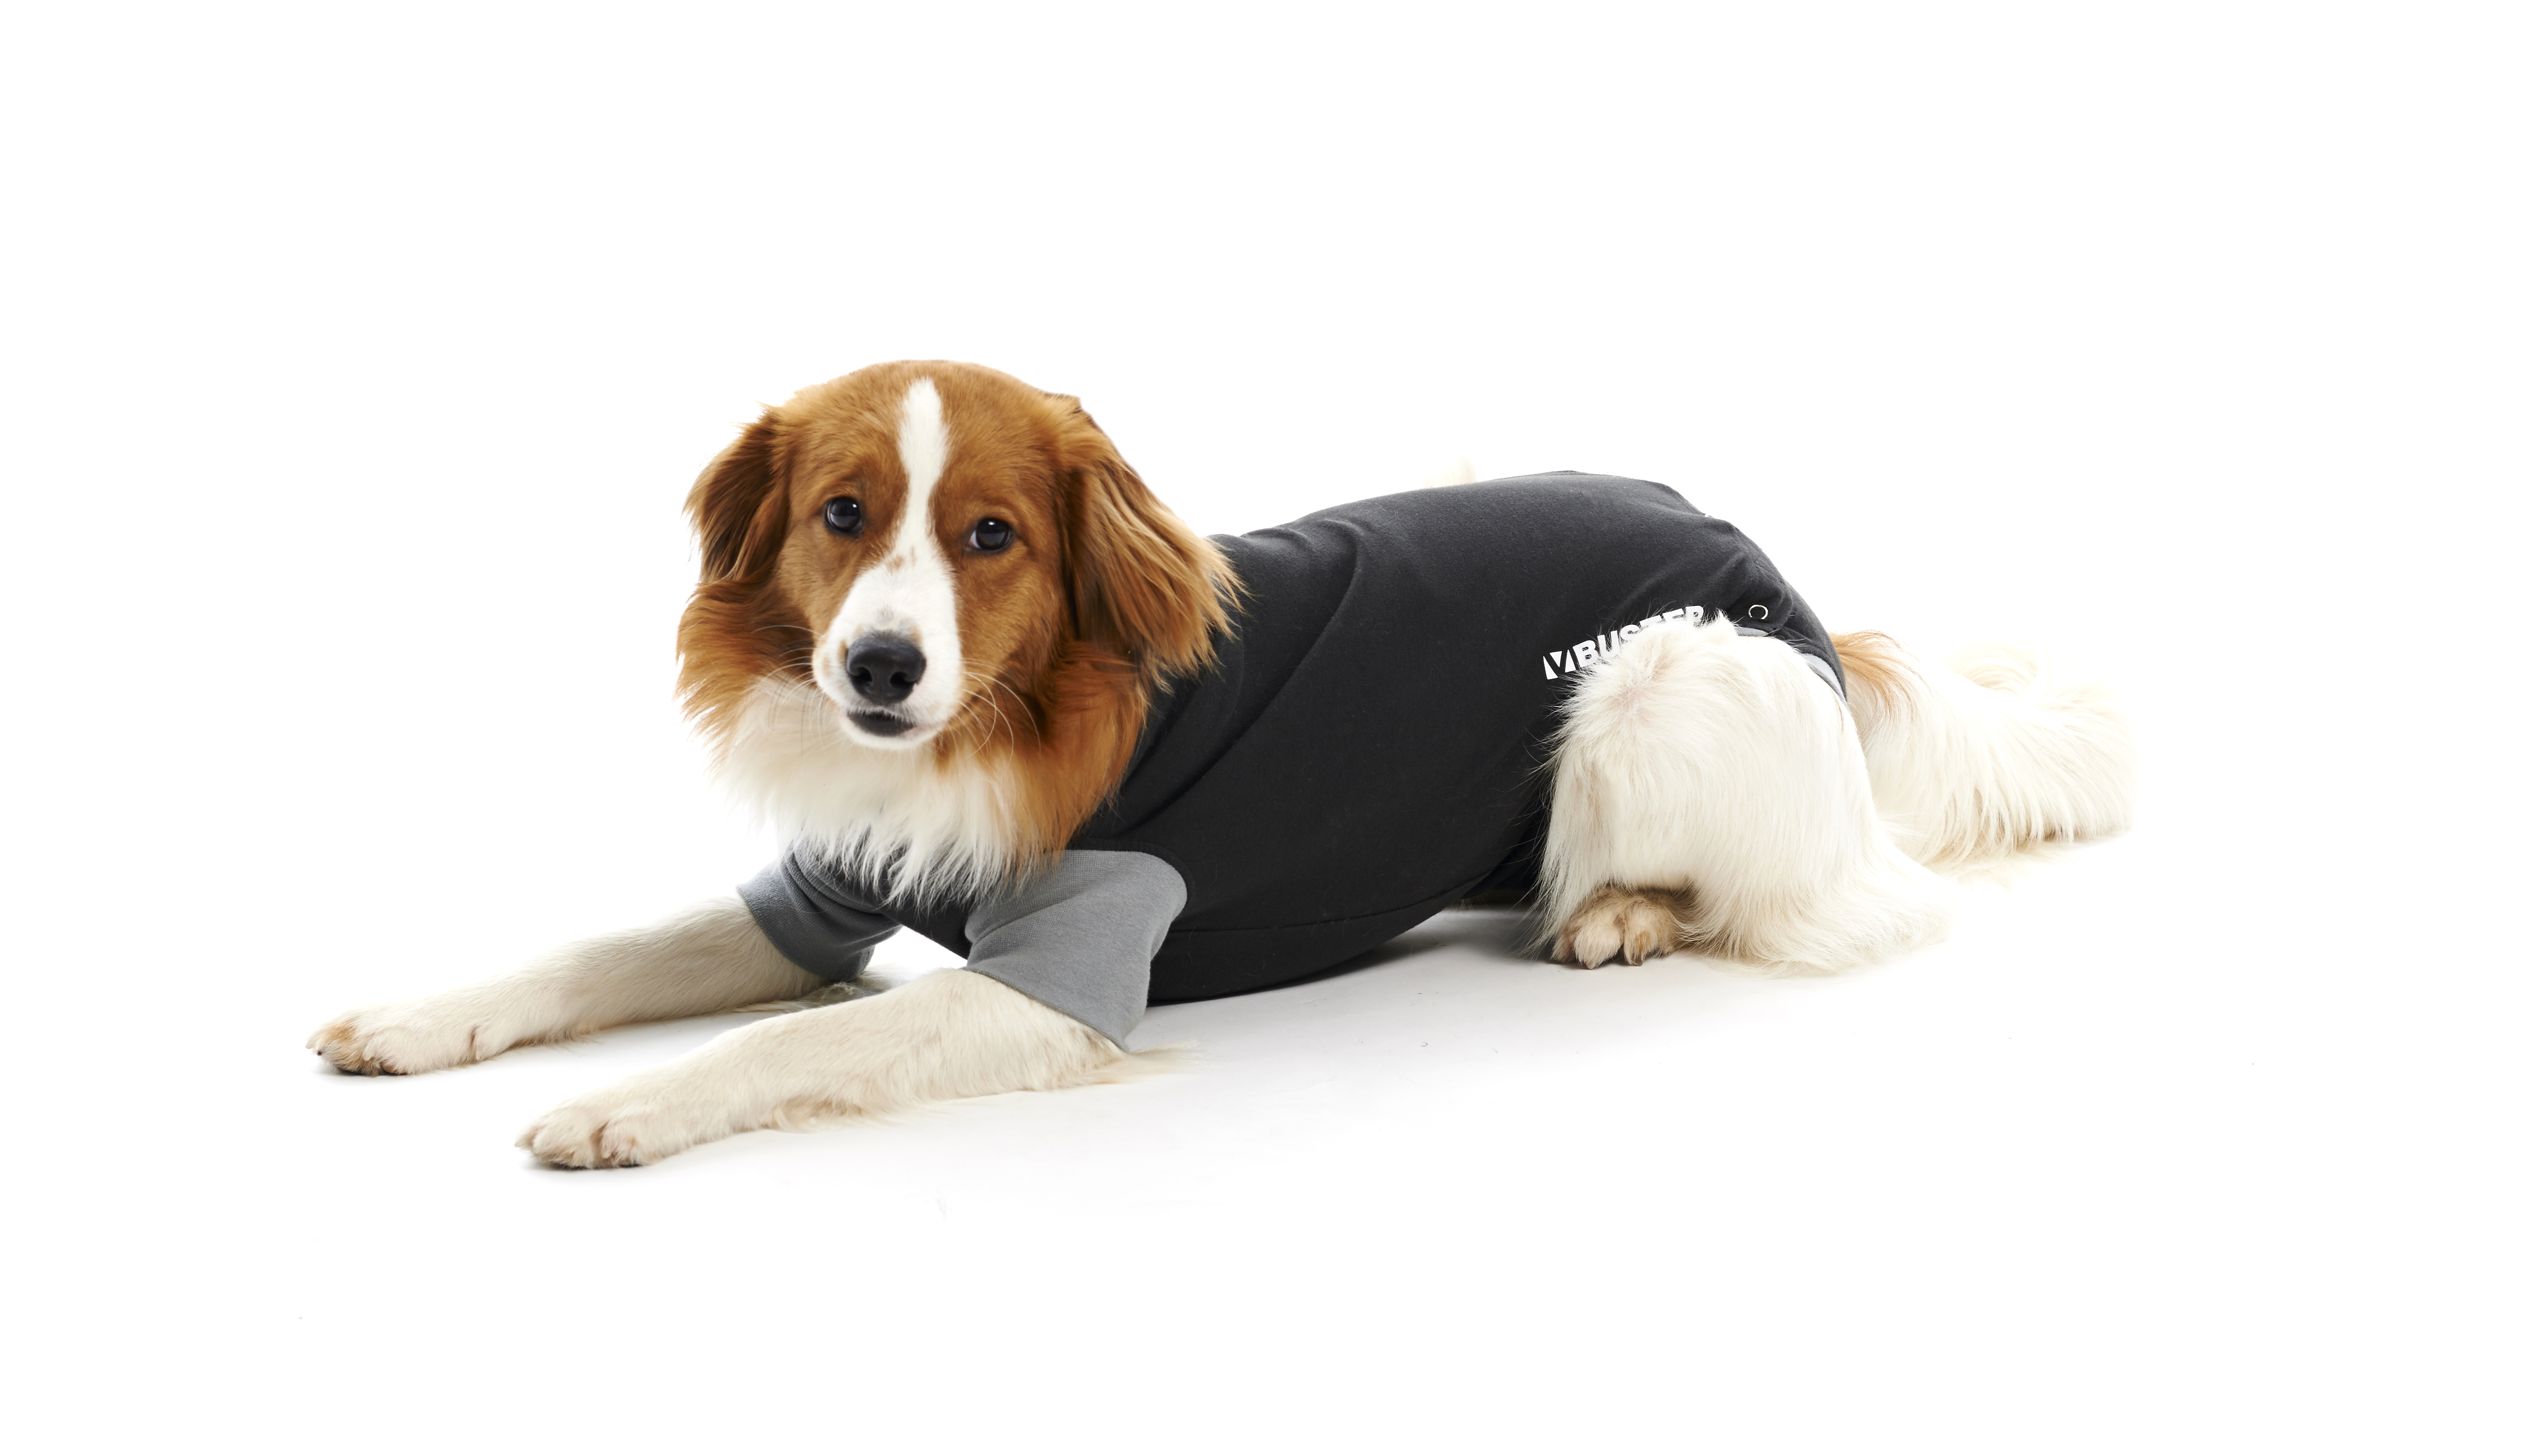 BUSTER Body Suit EasyGo for dogs, black/grey, 25 cm, size XXXS